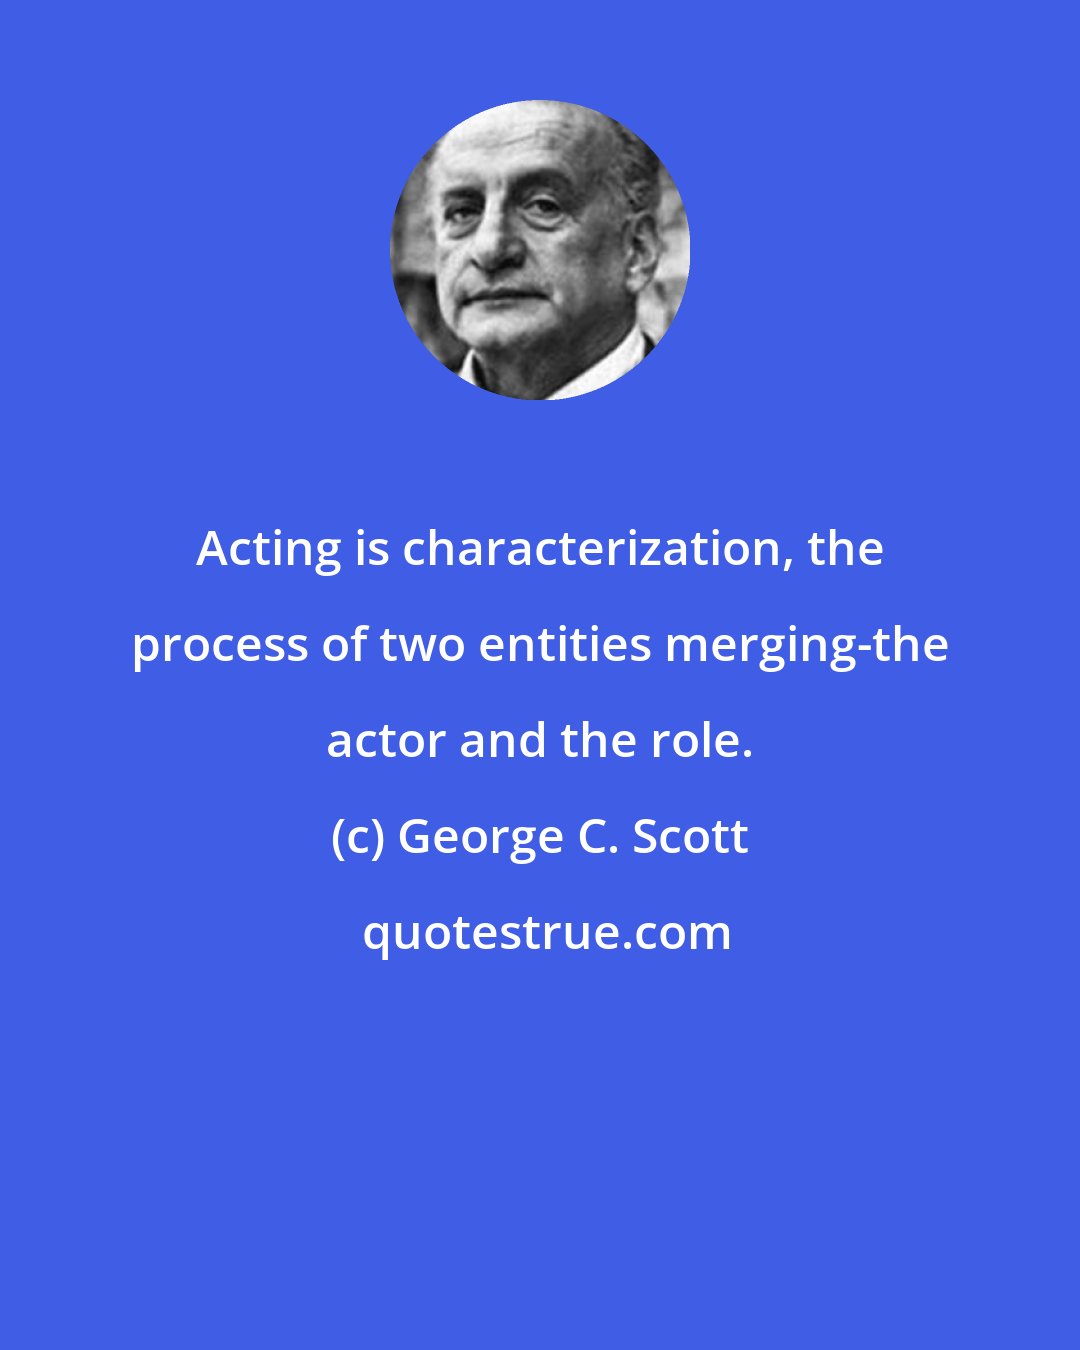 George C. Scott: Acting is characterization, the process of two entities merging-the actor and the role.